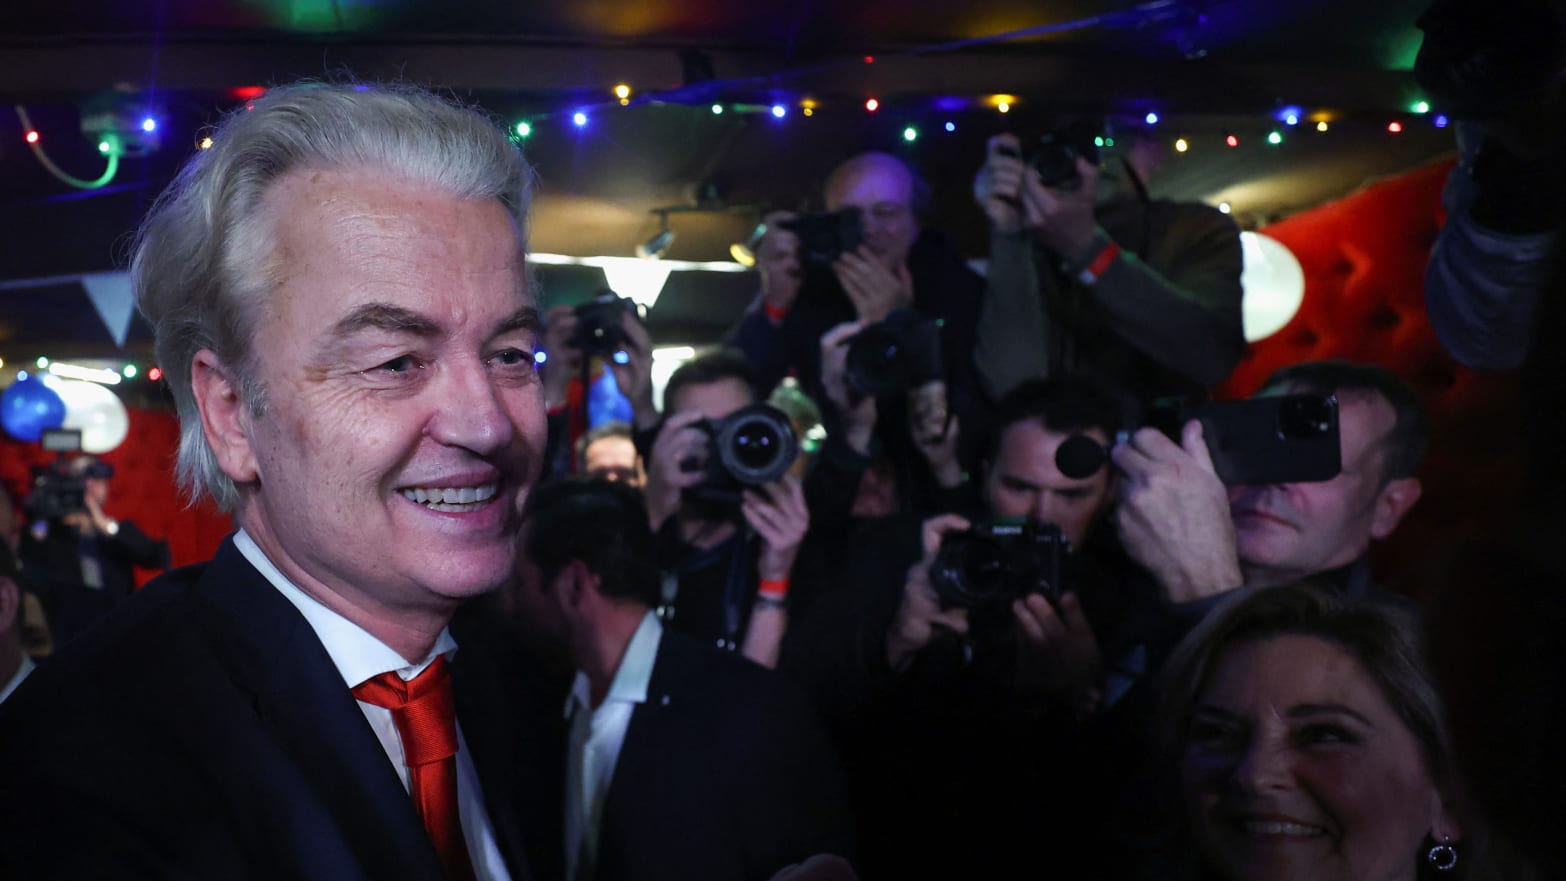 Geert Wilders reacts to the exit poll and early results in the Dutch parliamentary elections